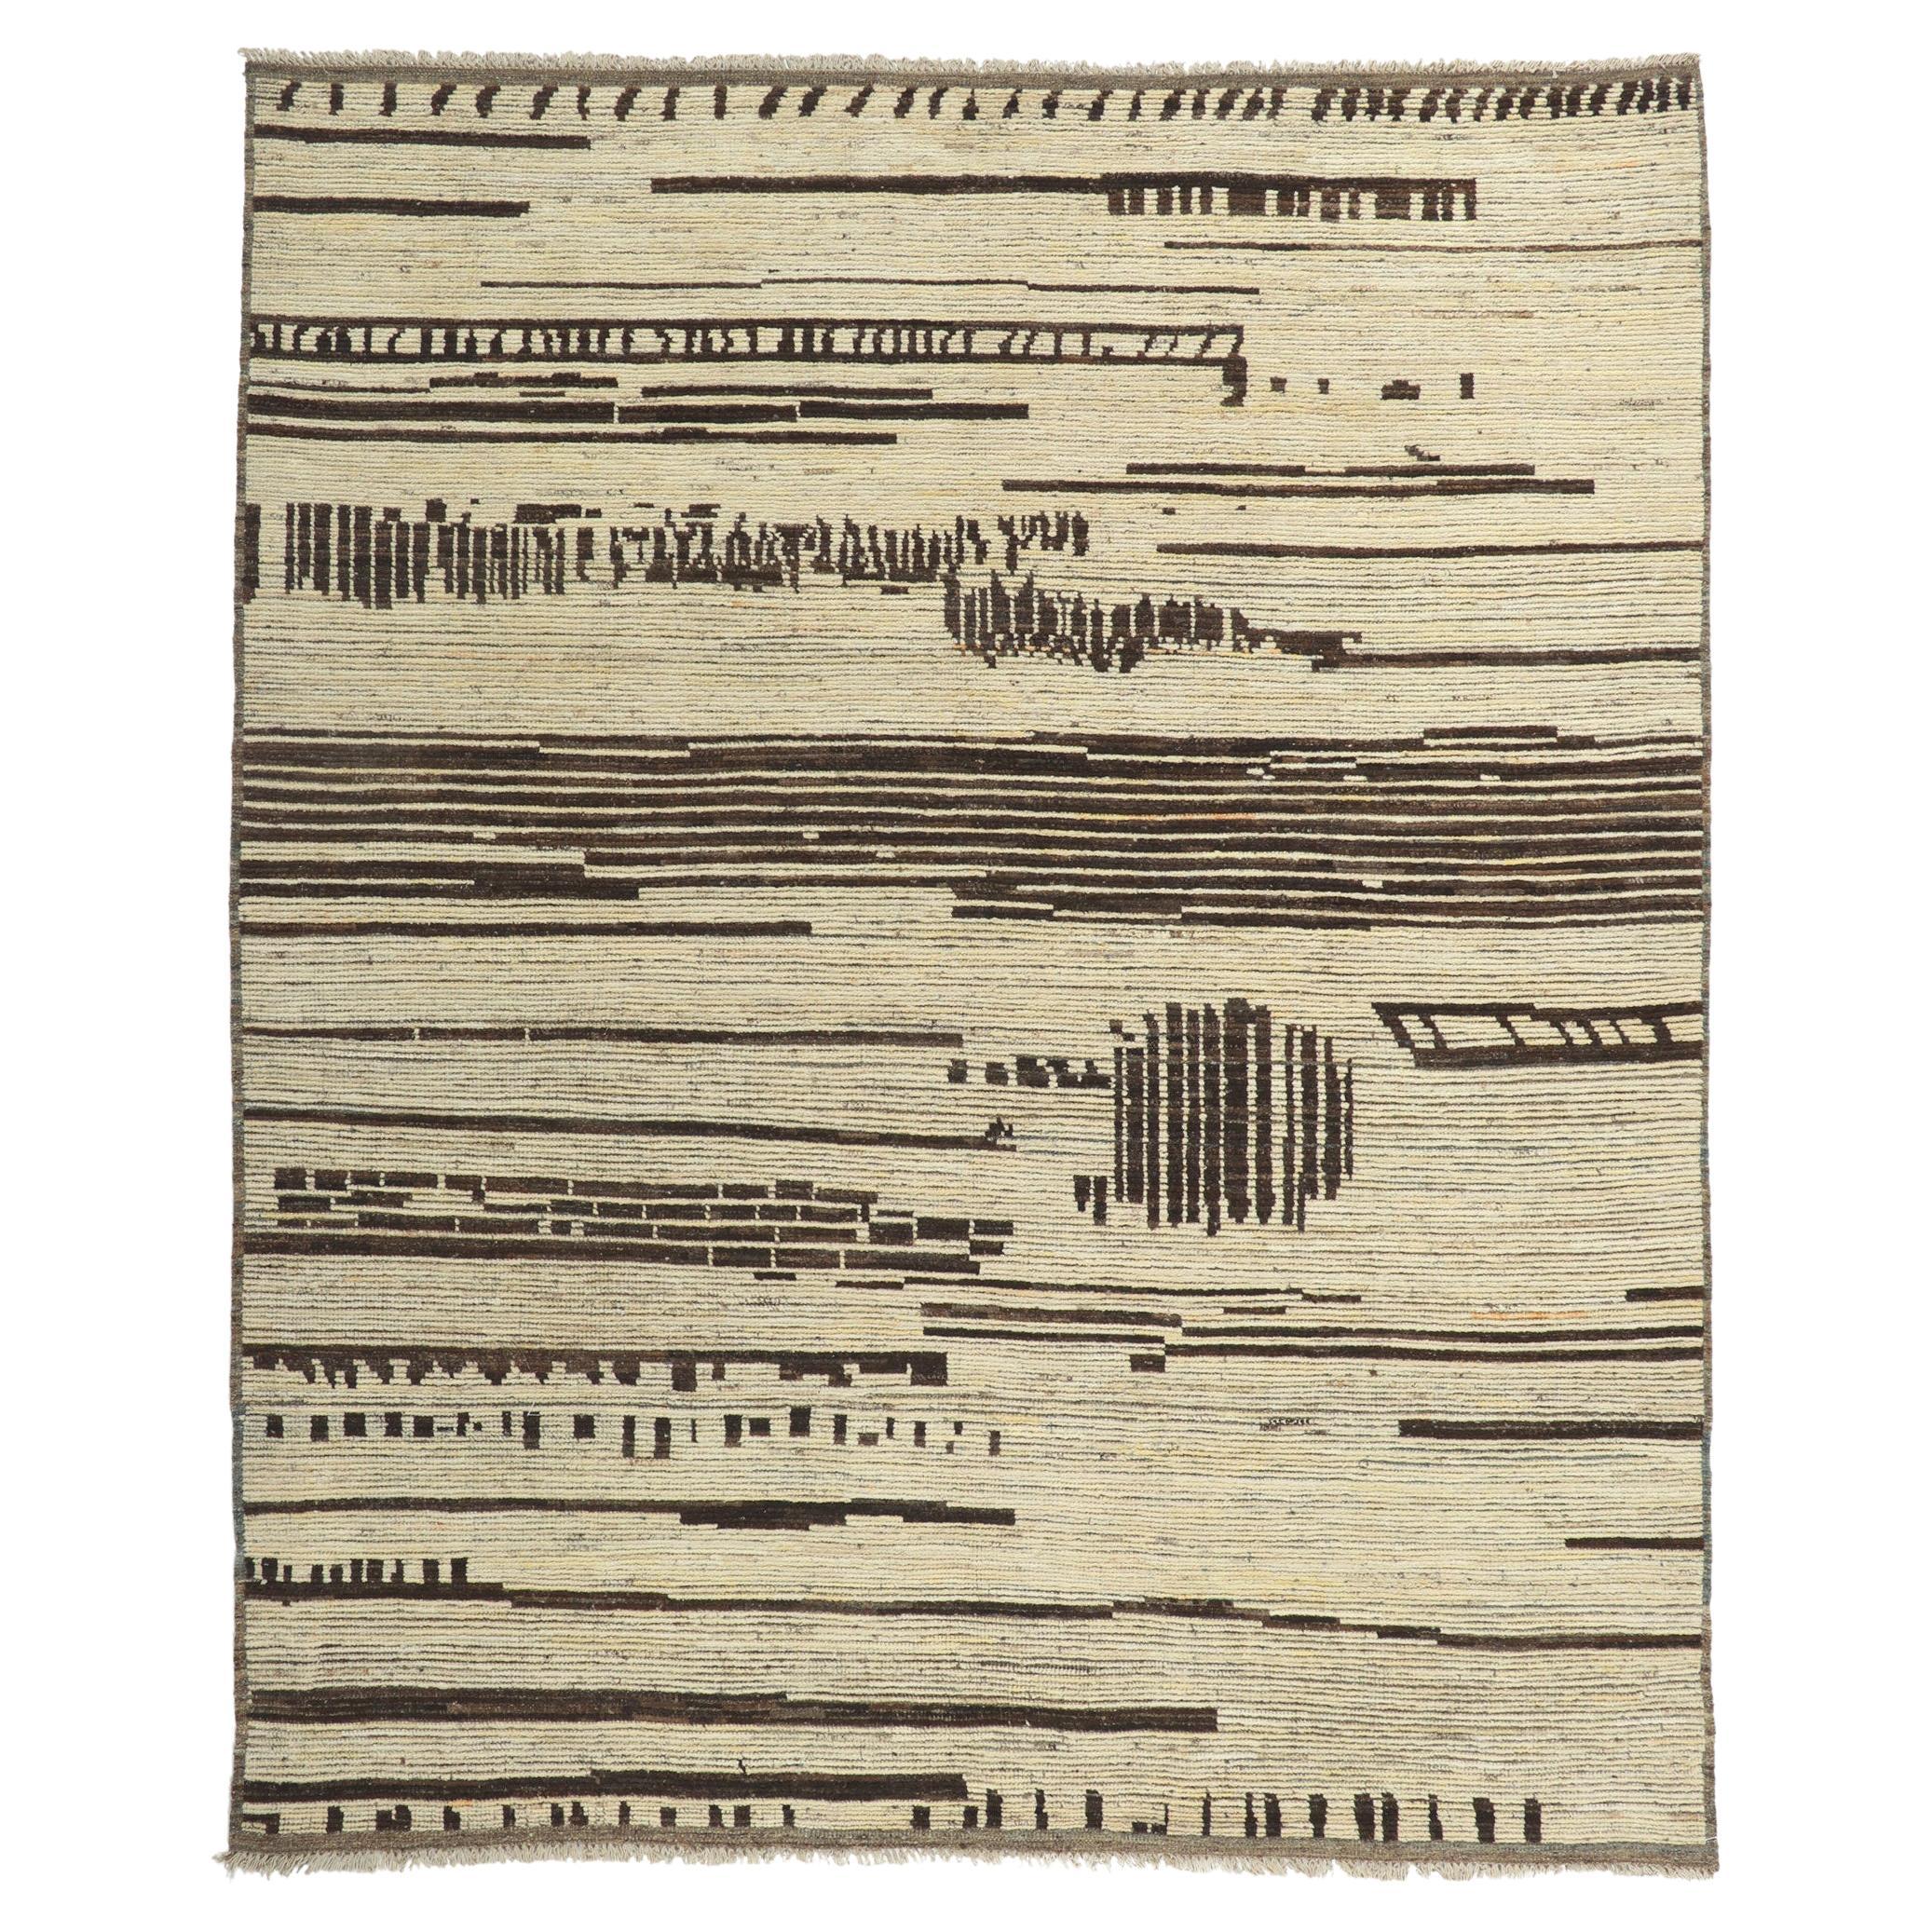 New Contemporary Moroccan Rug Inspired by Gunta Stolz and Bauhaus Movement For Sale